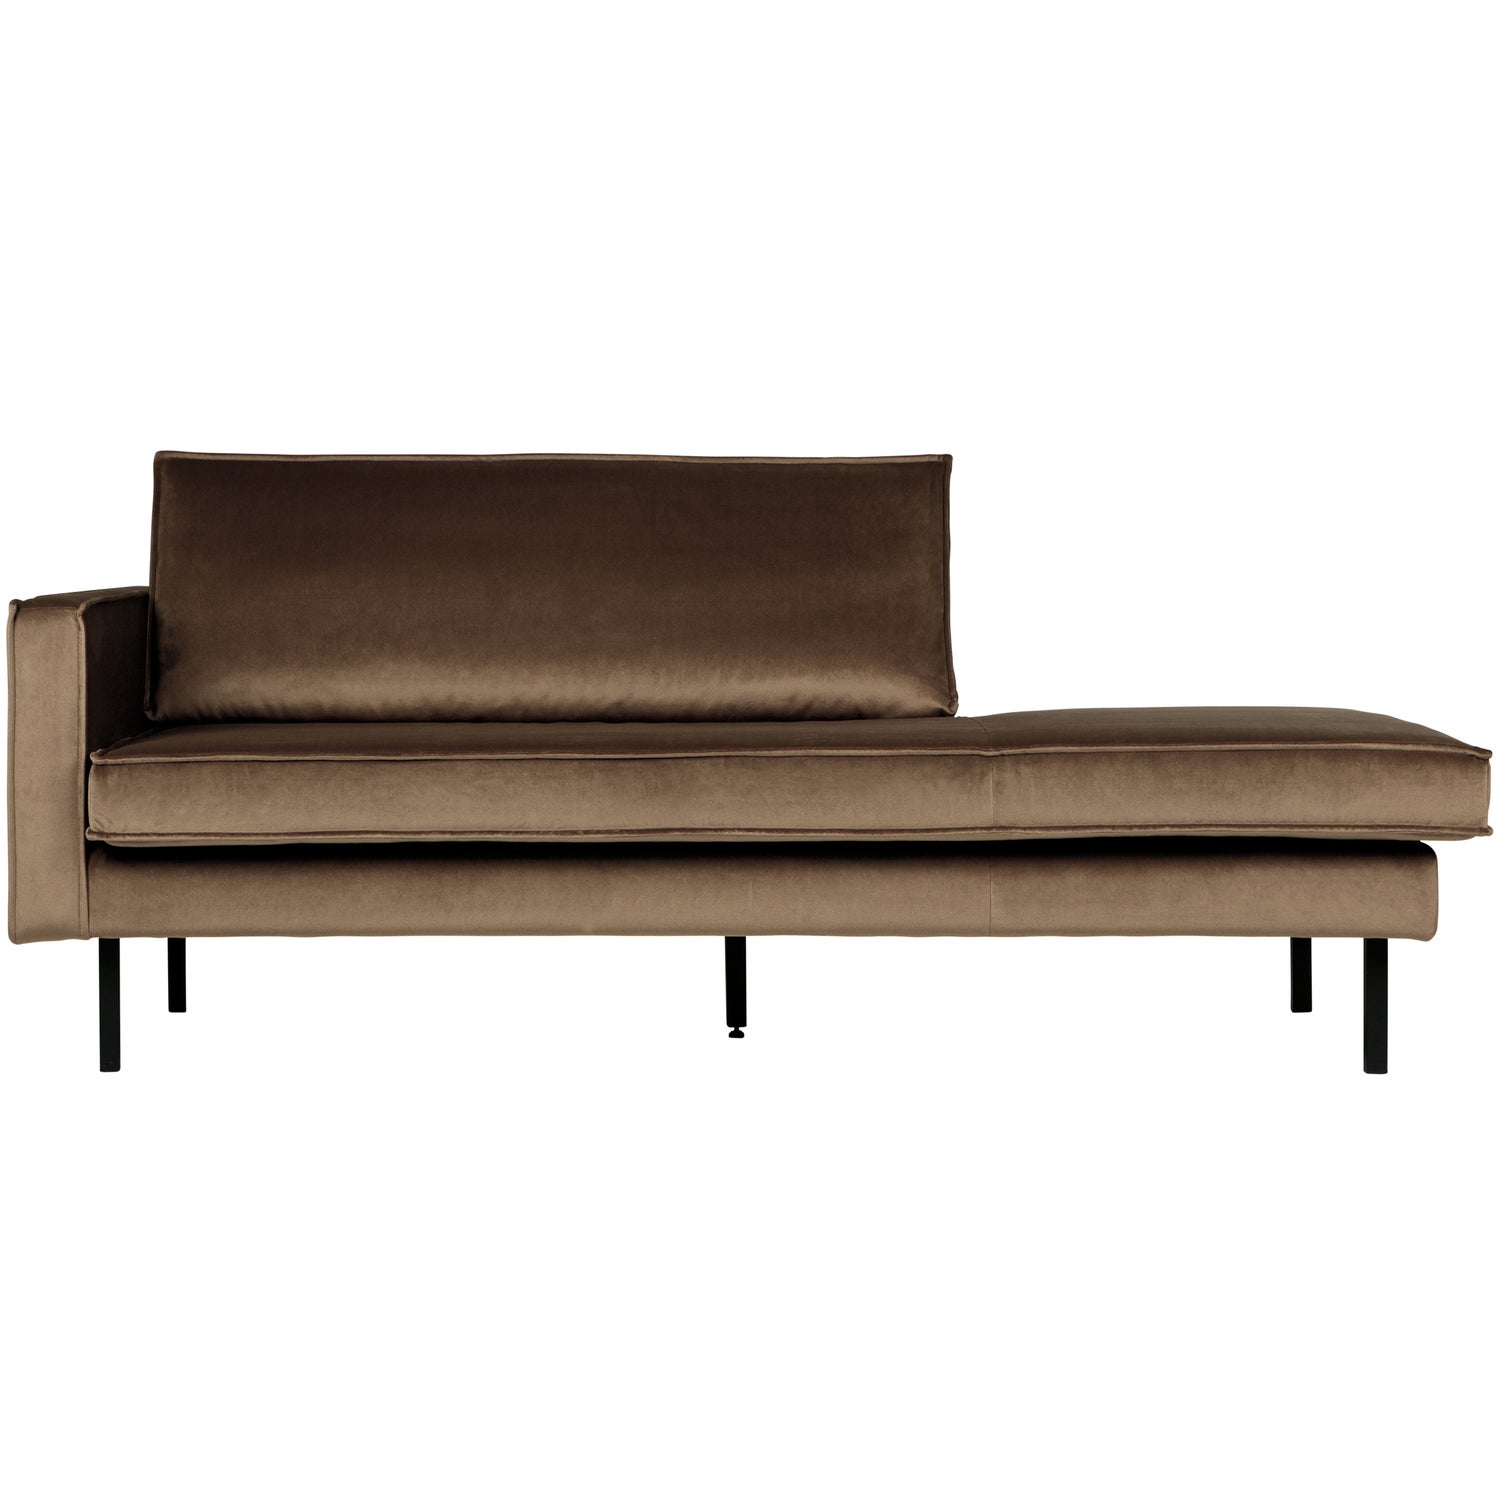 800743-12-01_VS_BP_Rodeo_daybed_left_taupe_EA.jpg?auto=webp&format=png&width=1500&height=1500